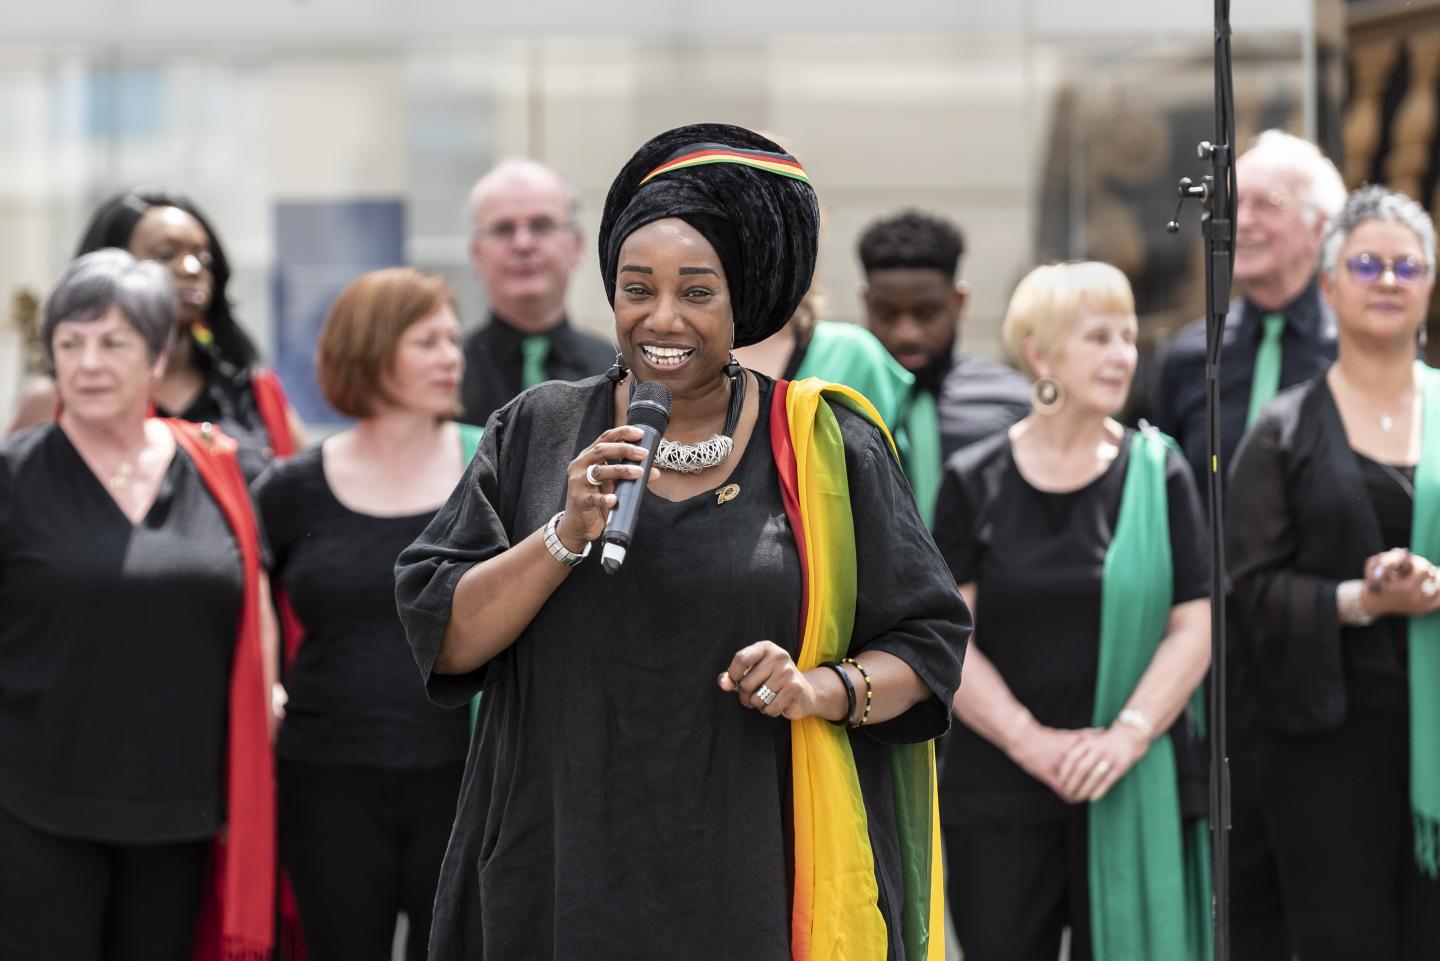 The image shows a choir of people with one woman in front holding a microphone.